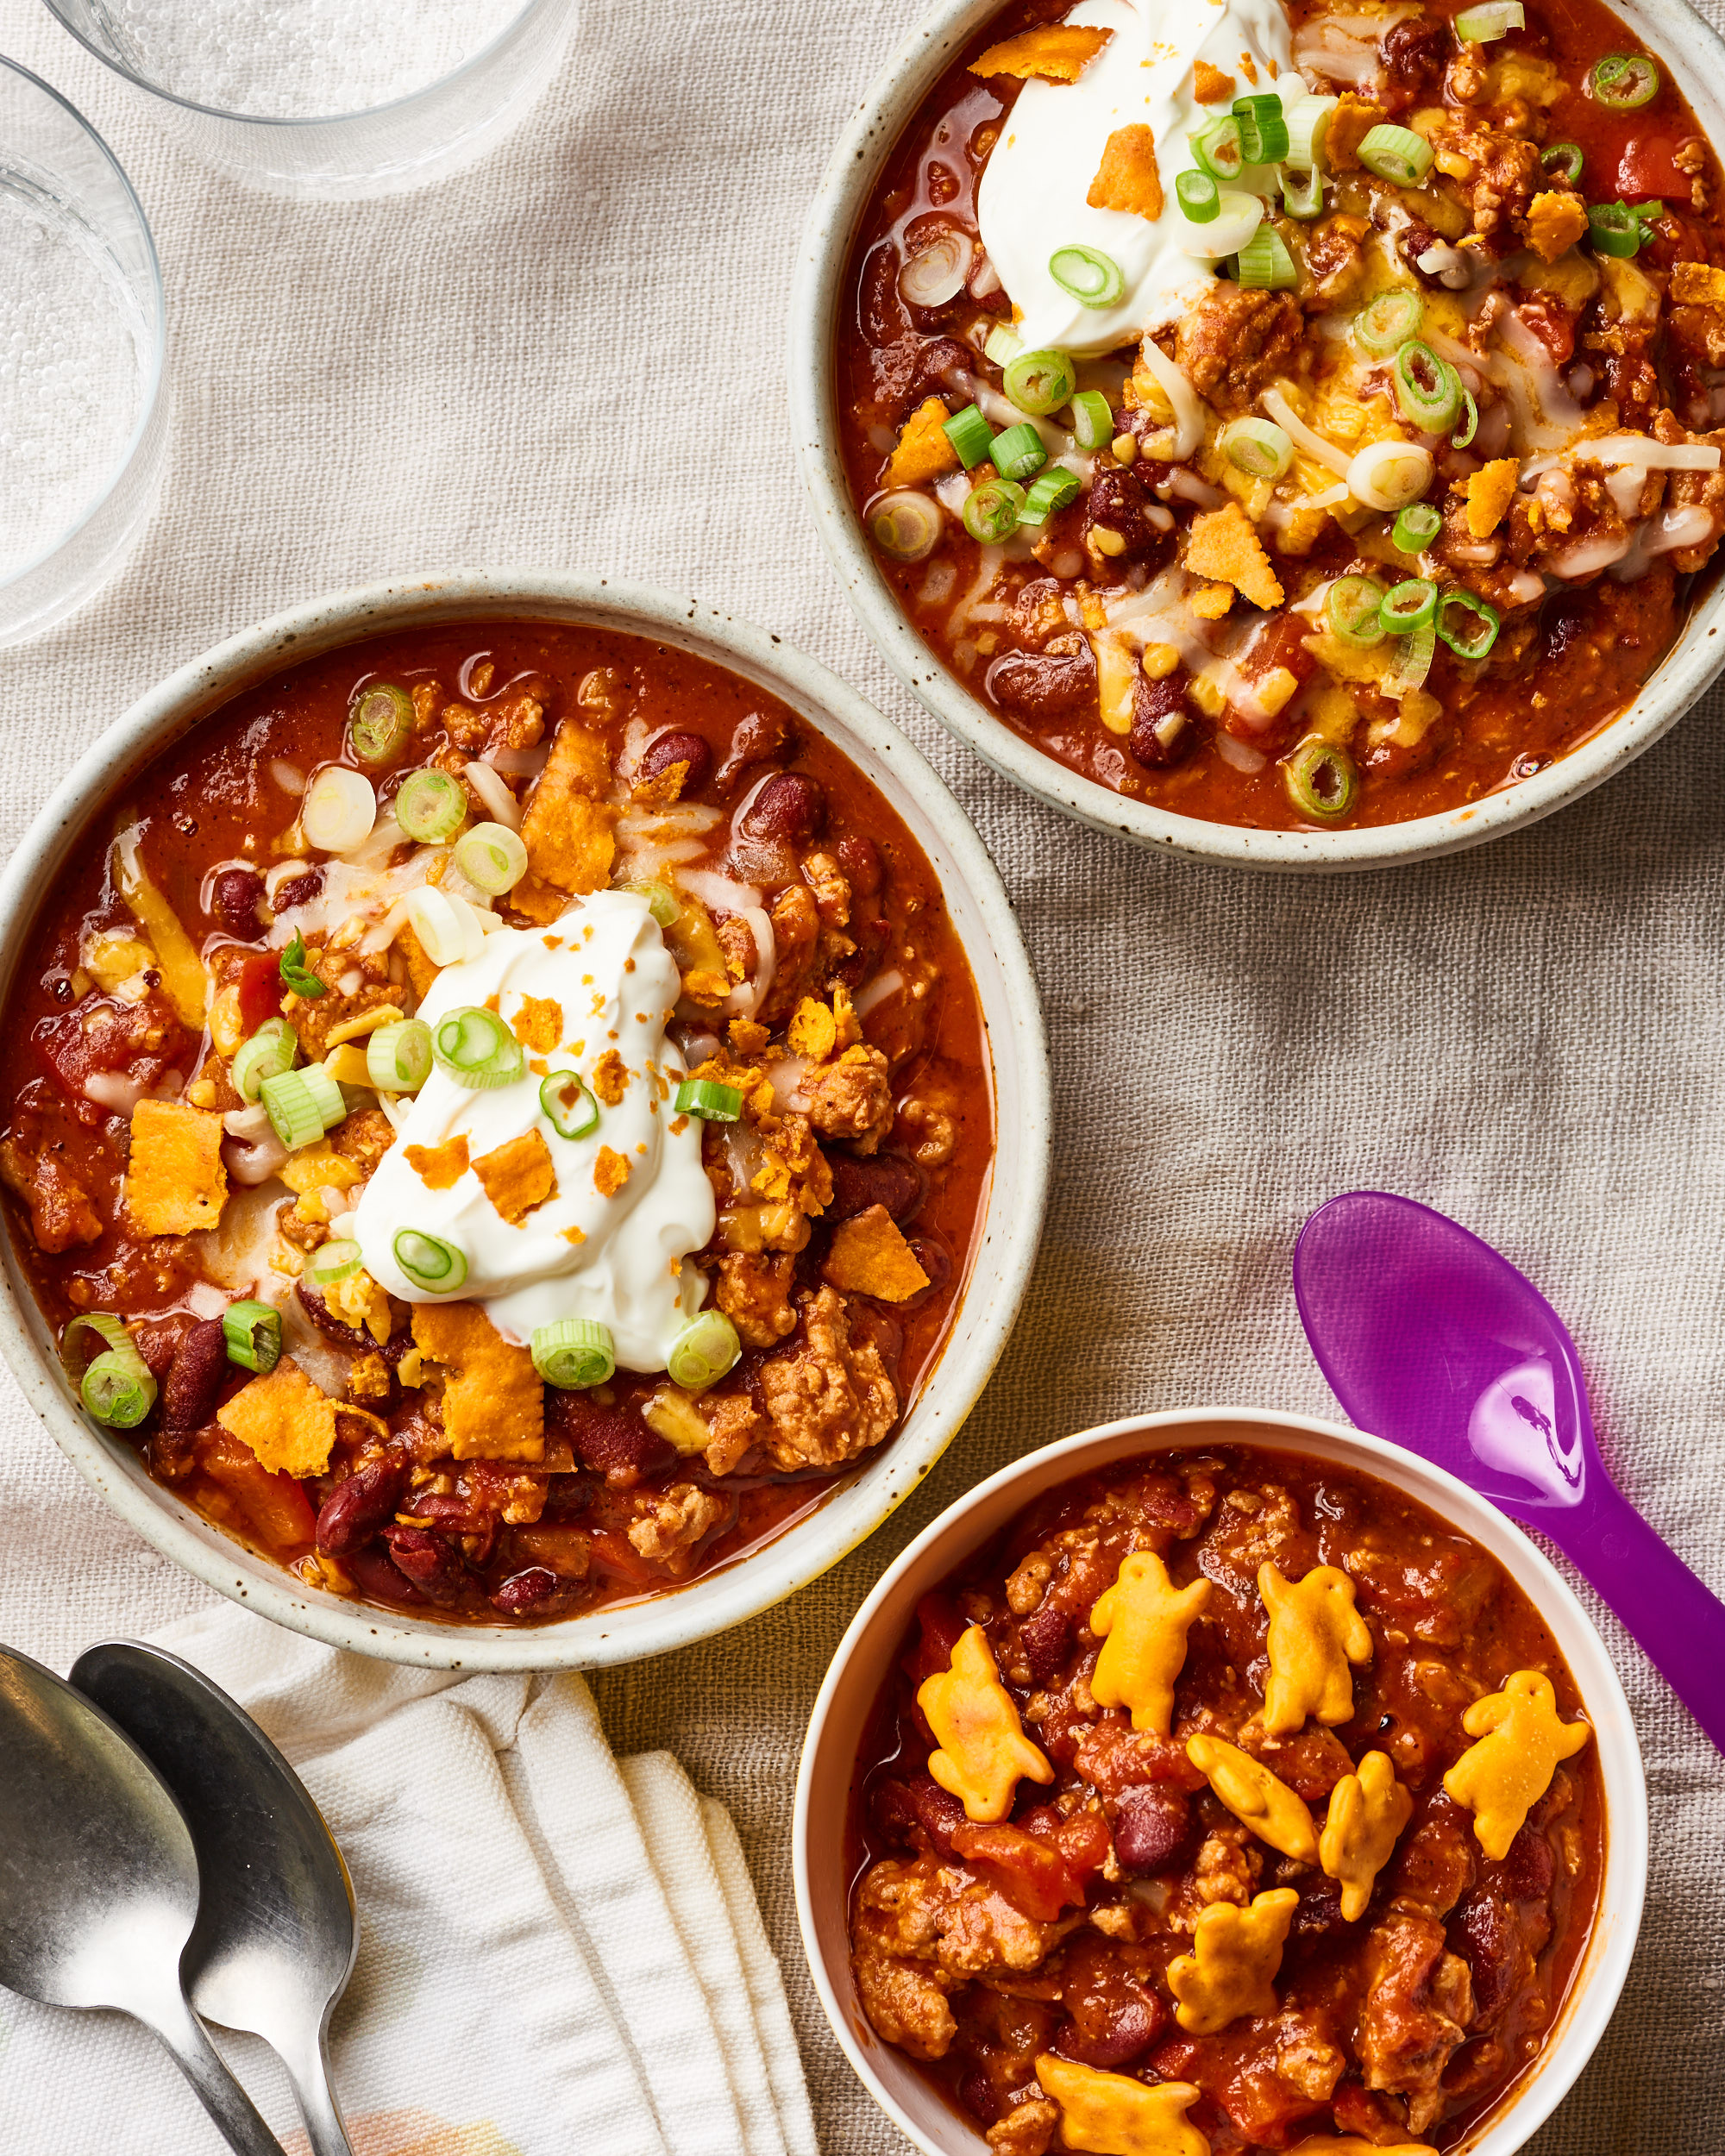 Our Best Homemade Turkey Chili